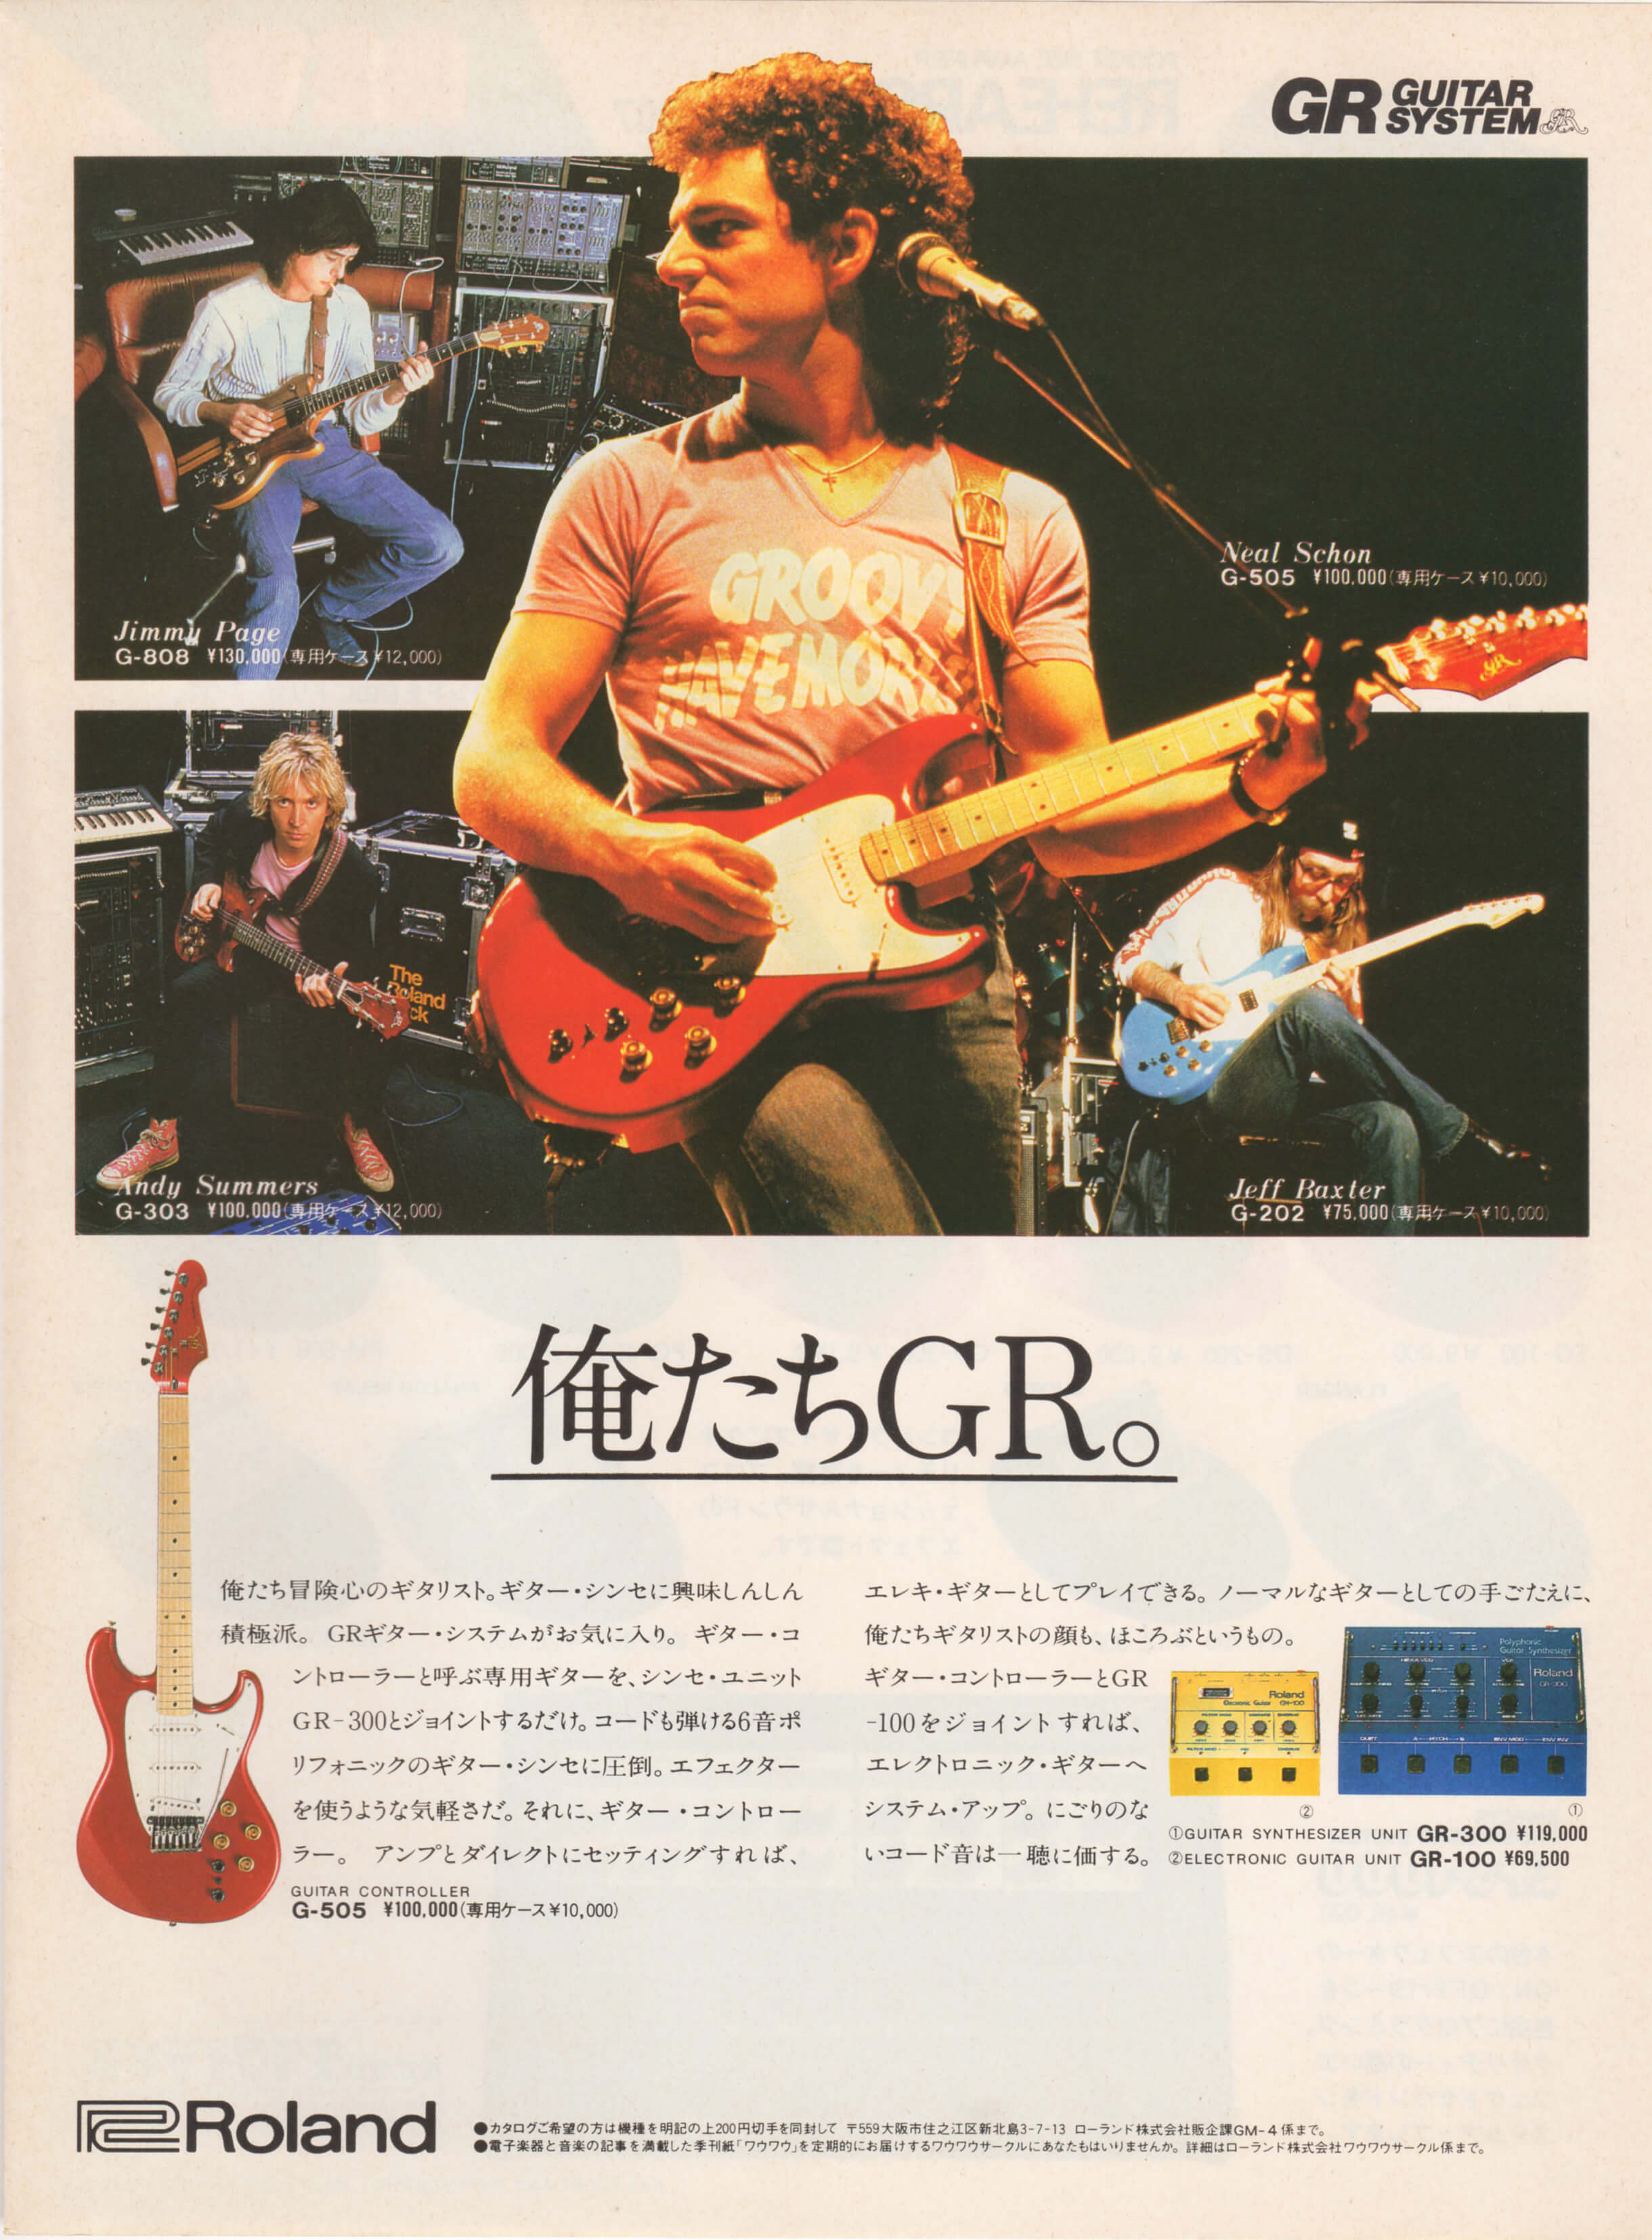 Journey guitarist Neal Schon and the Roland G-505 Guitar and GR-300 Guitar Synthesizer - Guitar magazine - Japan - April 1983.